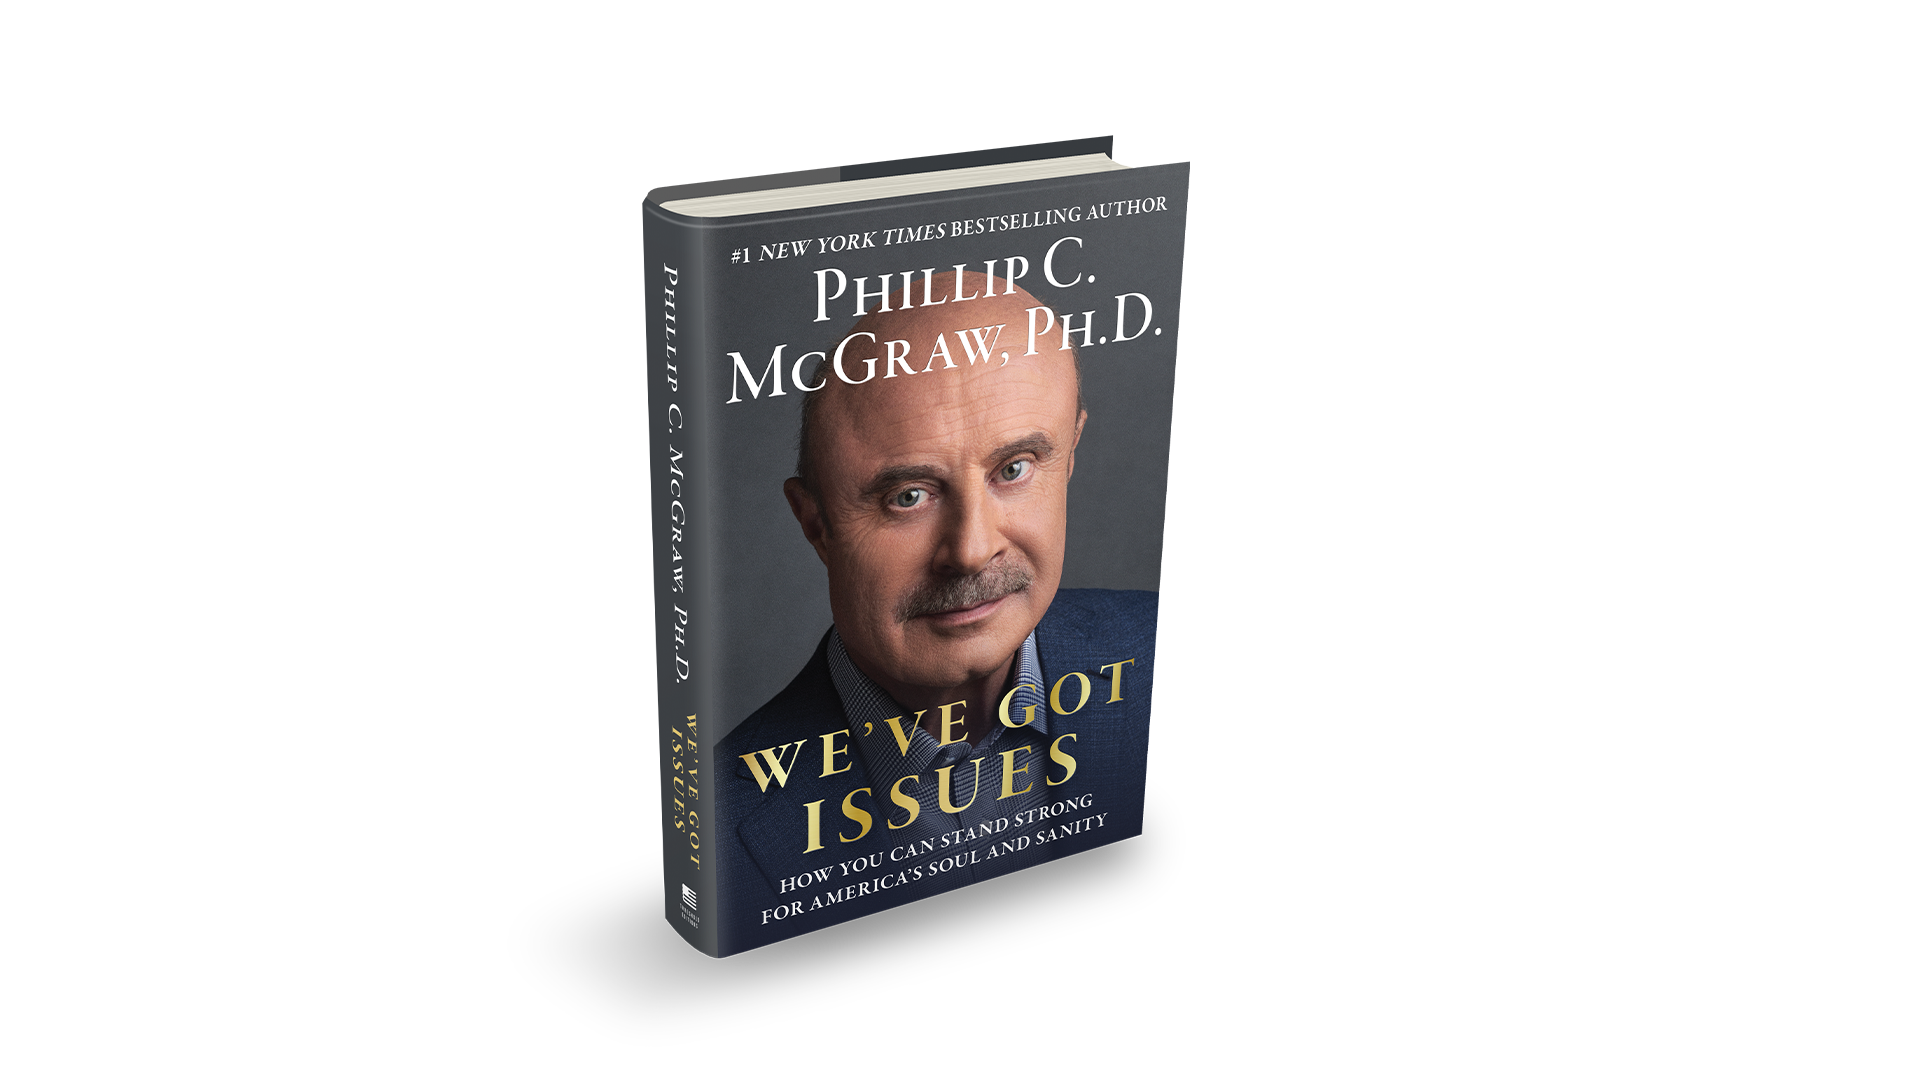 We’ve Got Issues: How You Can Stand Strong for America’s Soul and Sanity by Dr. Phil by TBN